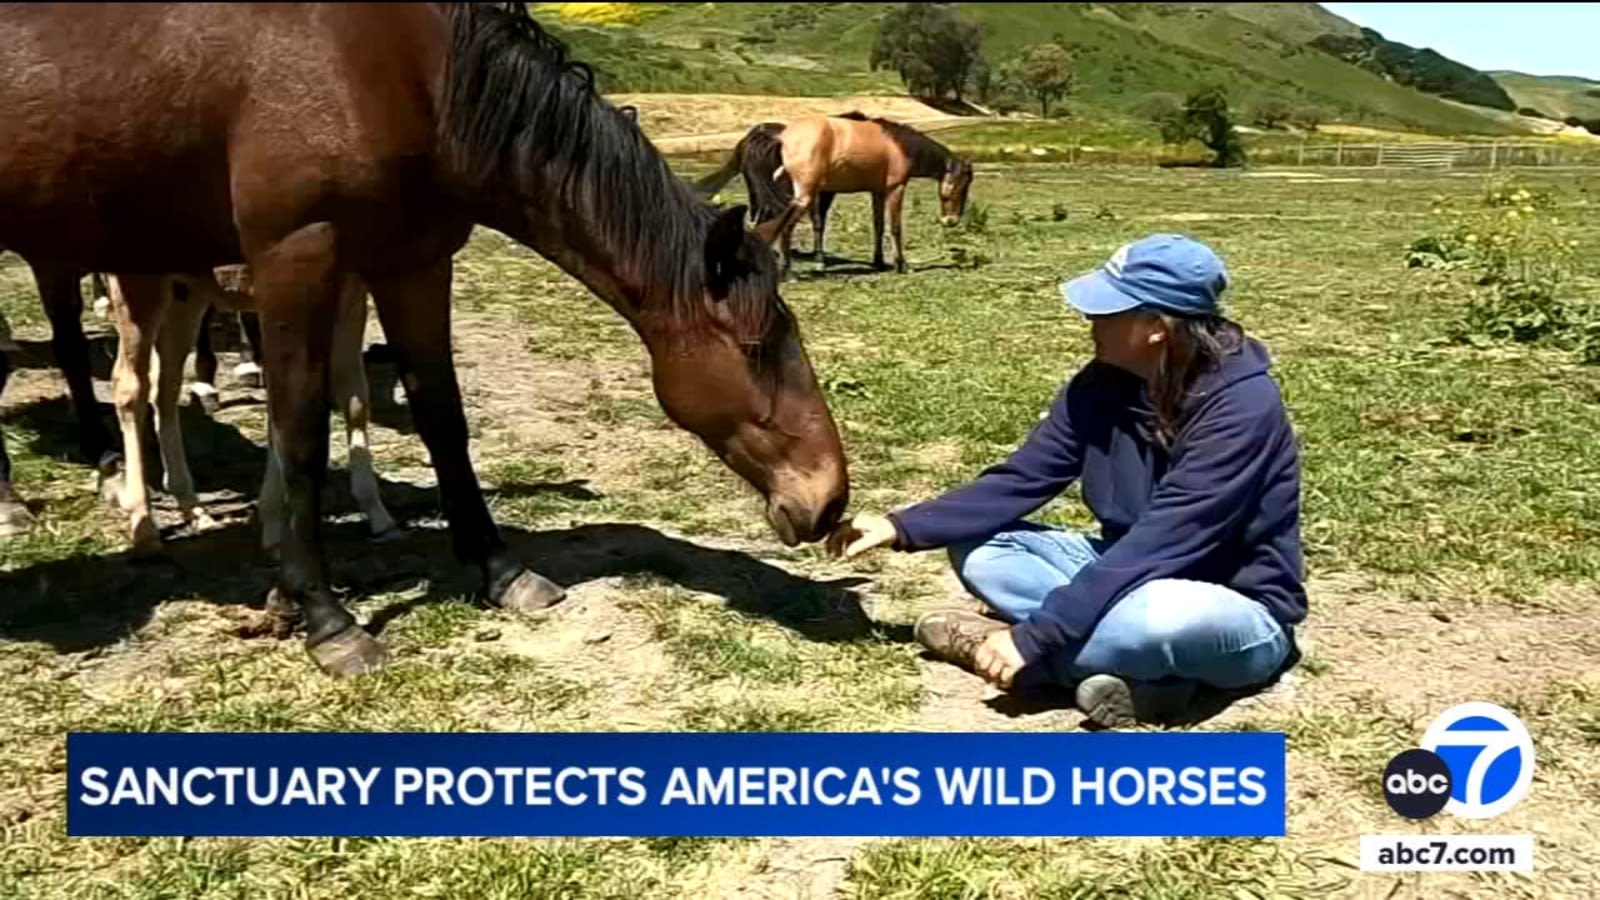 Return to Freedom Wild Horse Sanctuary in Lompoc creates safe haven for wild horses